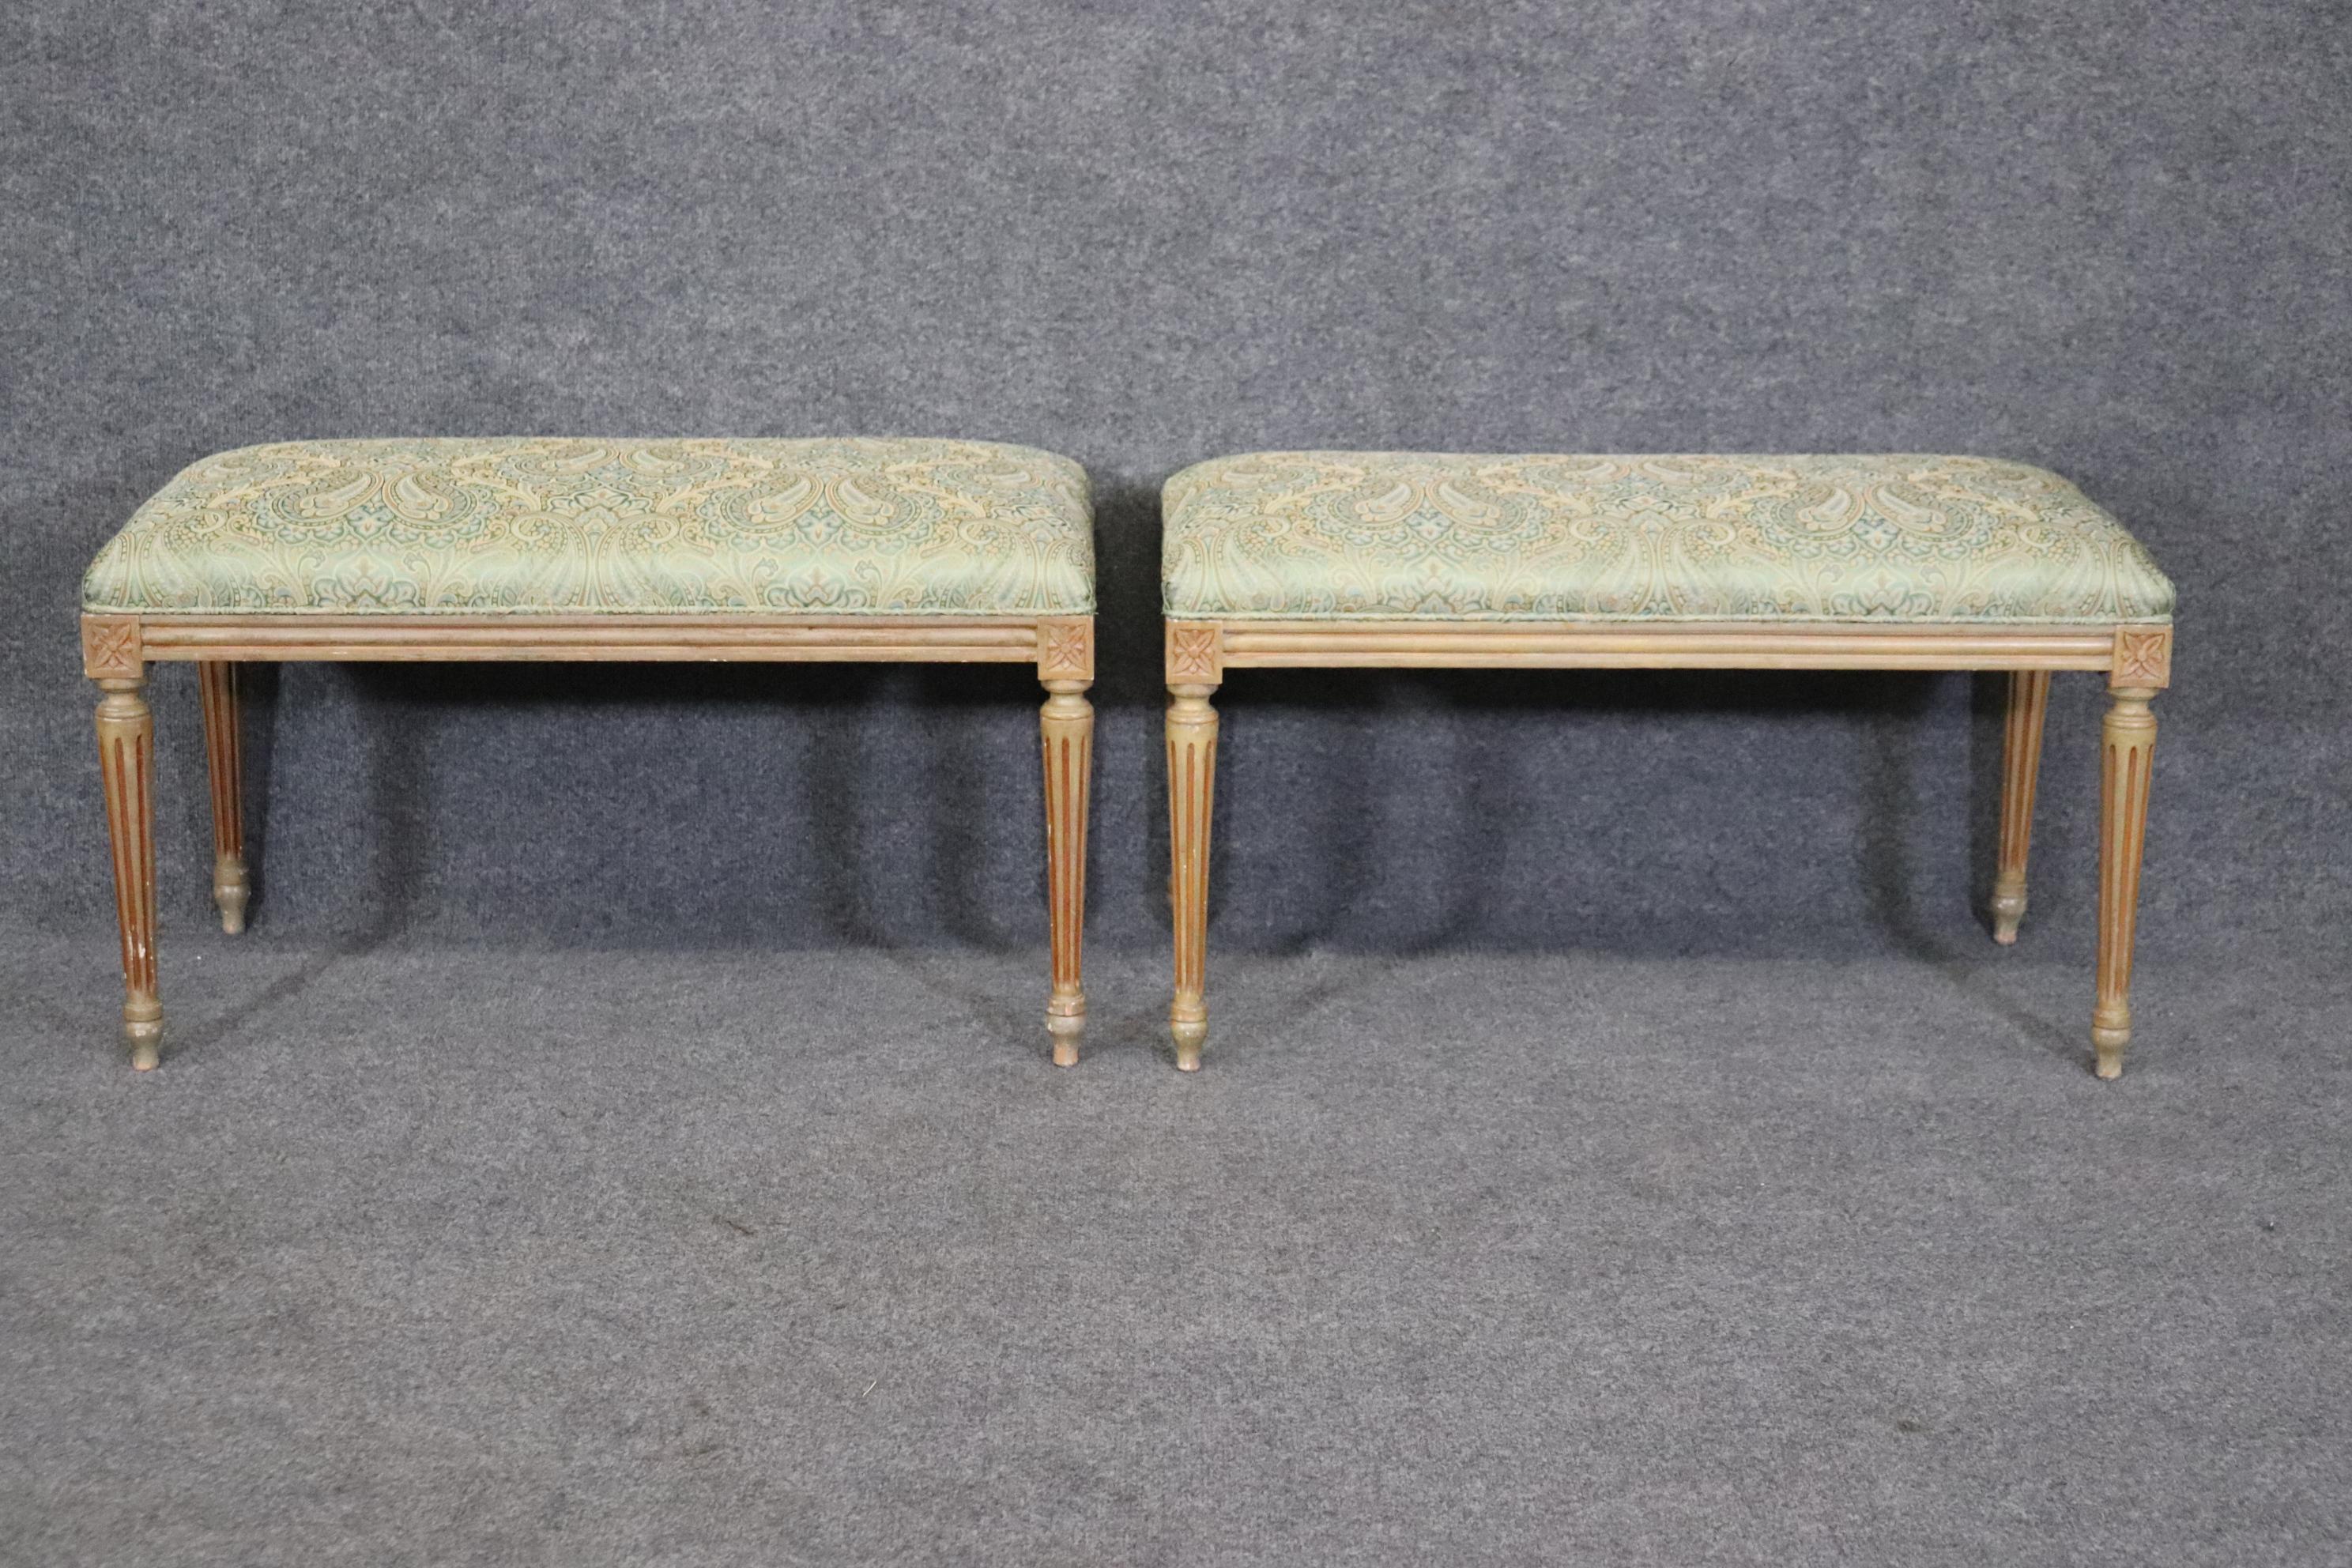 Dimensions: Height: 17 3/4in Width: 31in Depth: 15in

This is a beautiful pair of Louis XVI style distressed and upholstered benches. They were made with one thing in mind and that is quality! We can tell this by the finish that was used on the